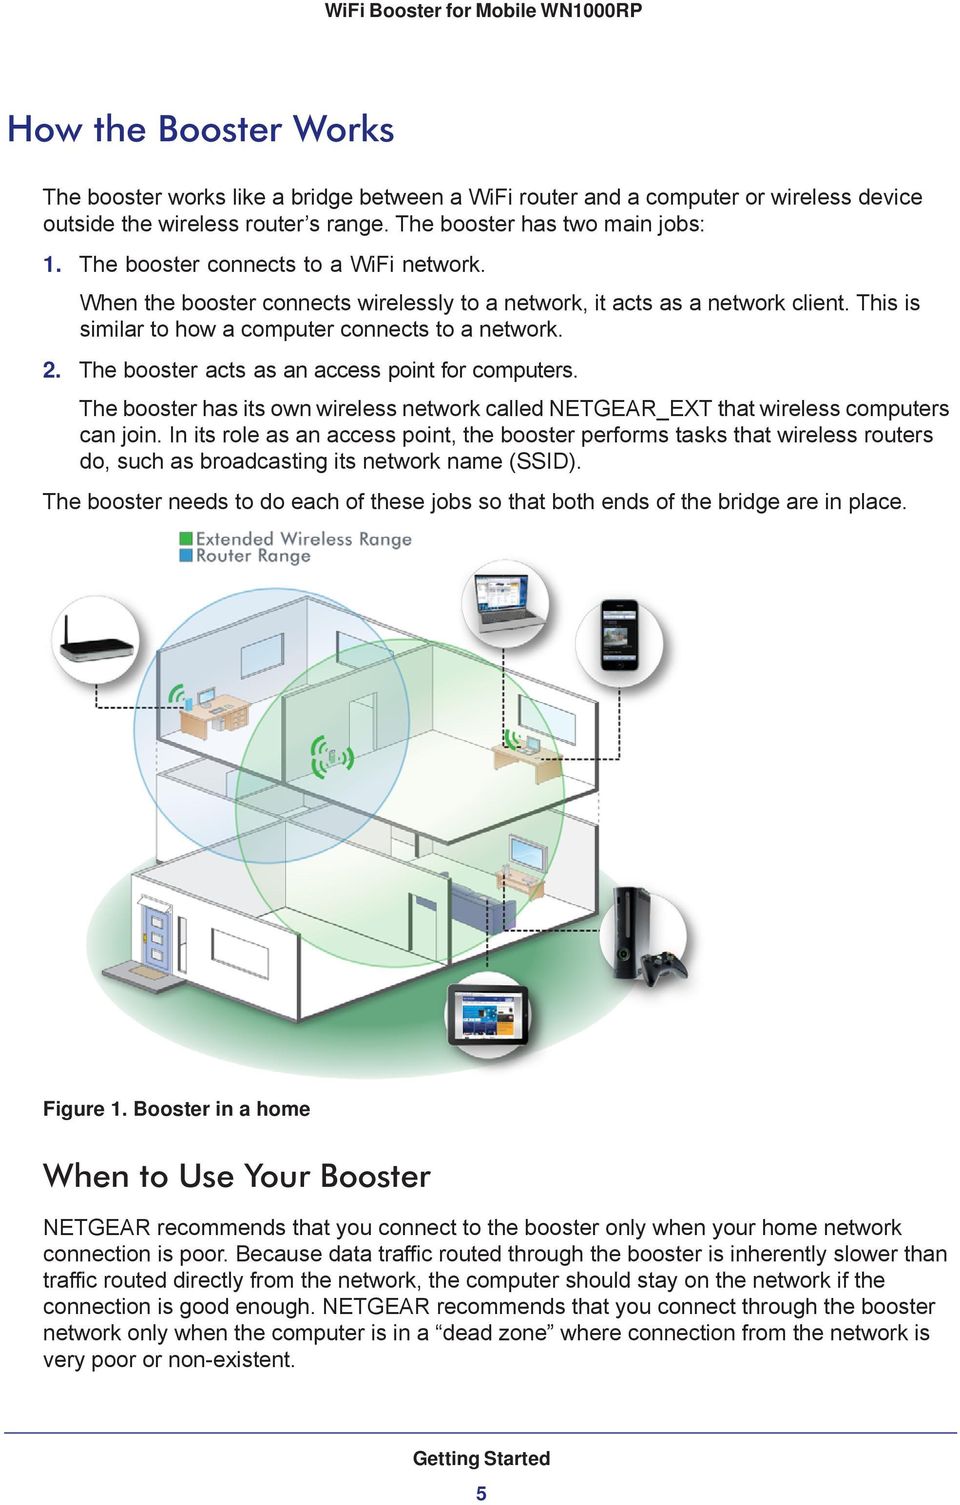 The booster acts as an access point for computers. The booster has its own wireless network called NETGEAR_EXT that wireless computers can join.